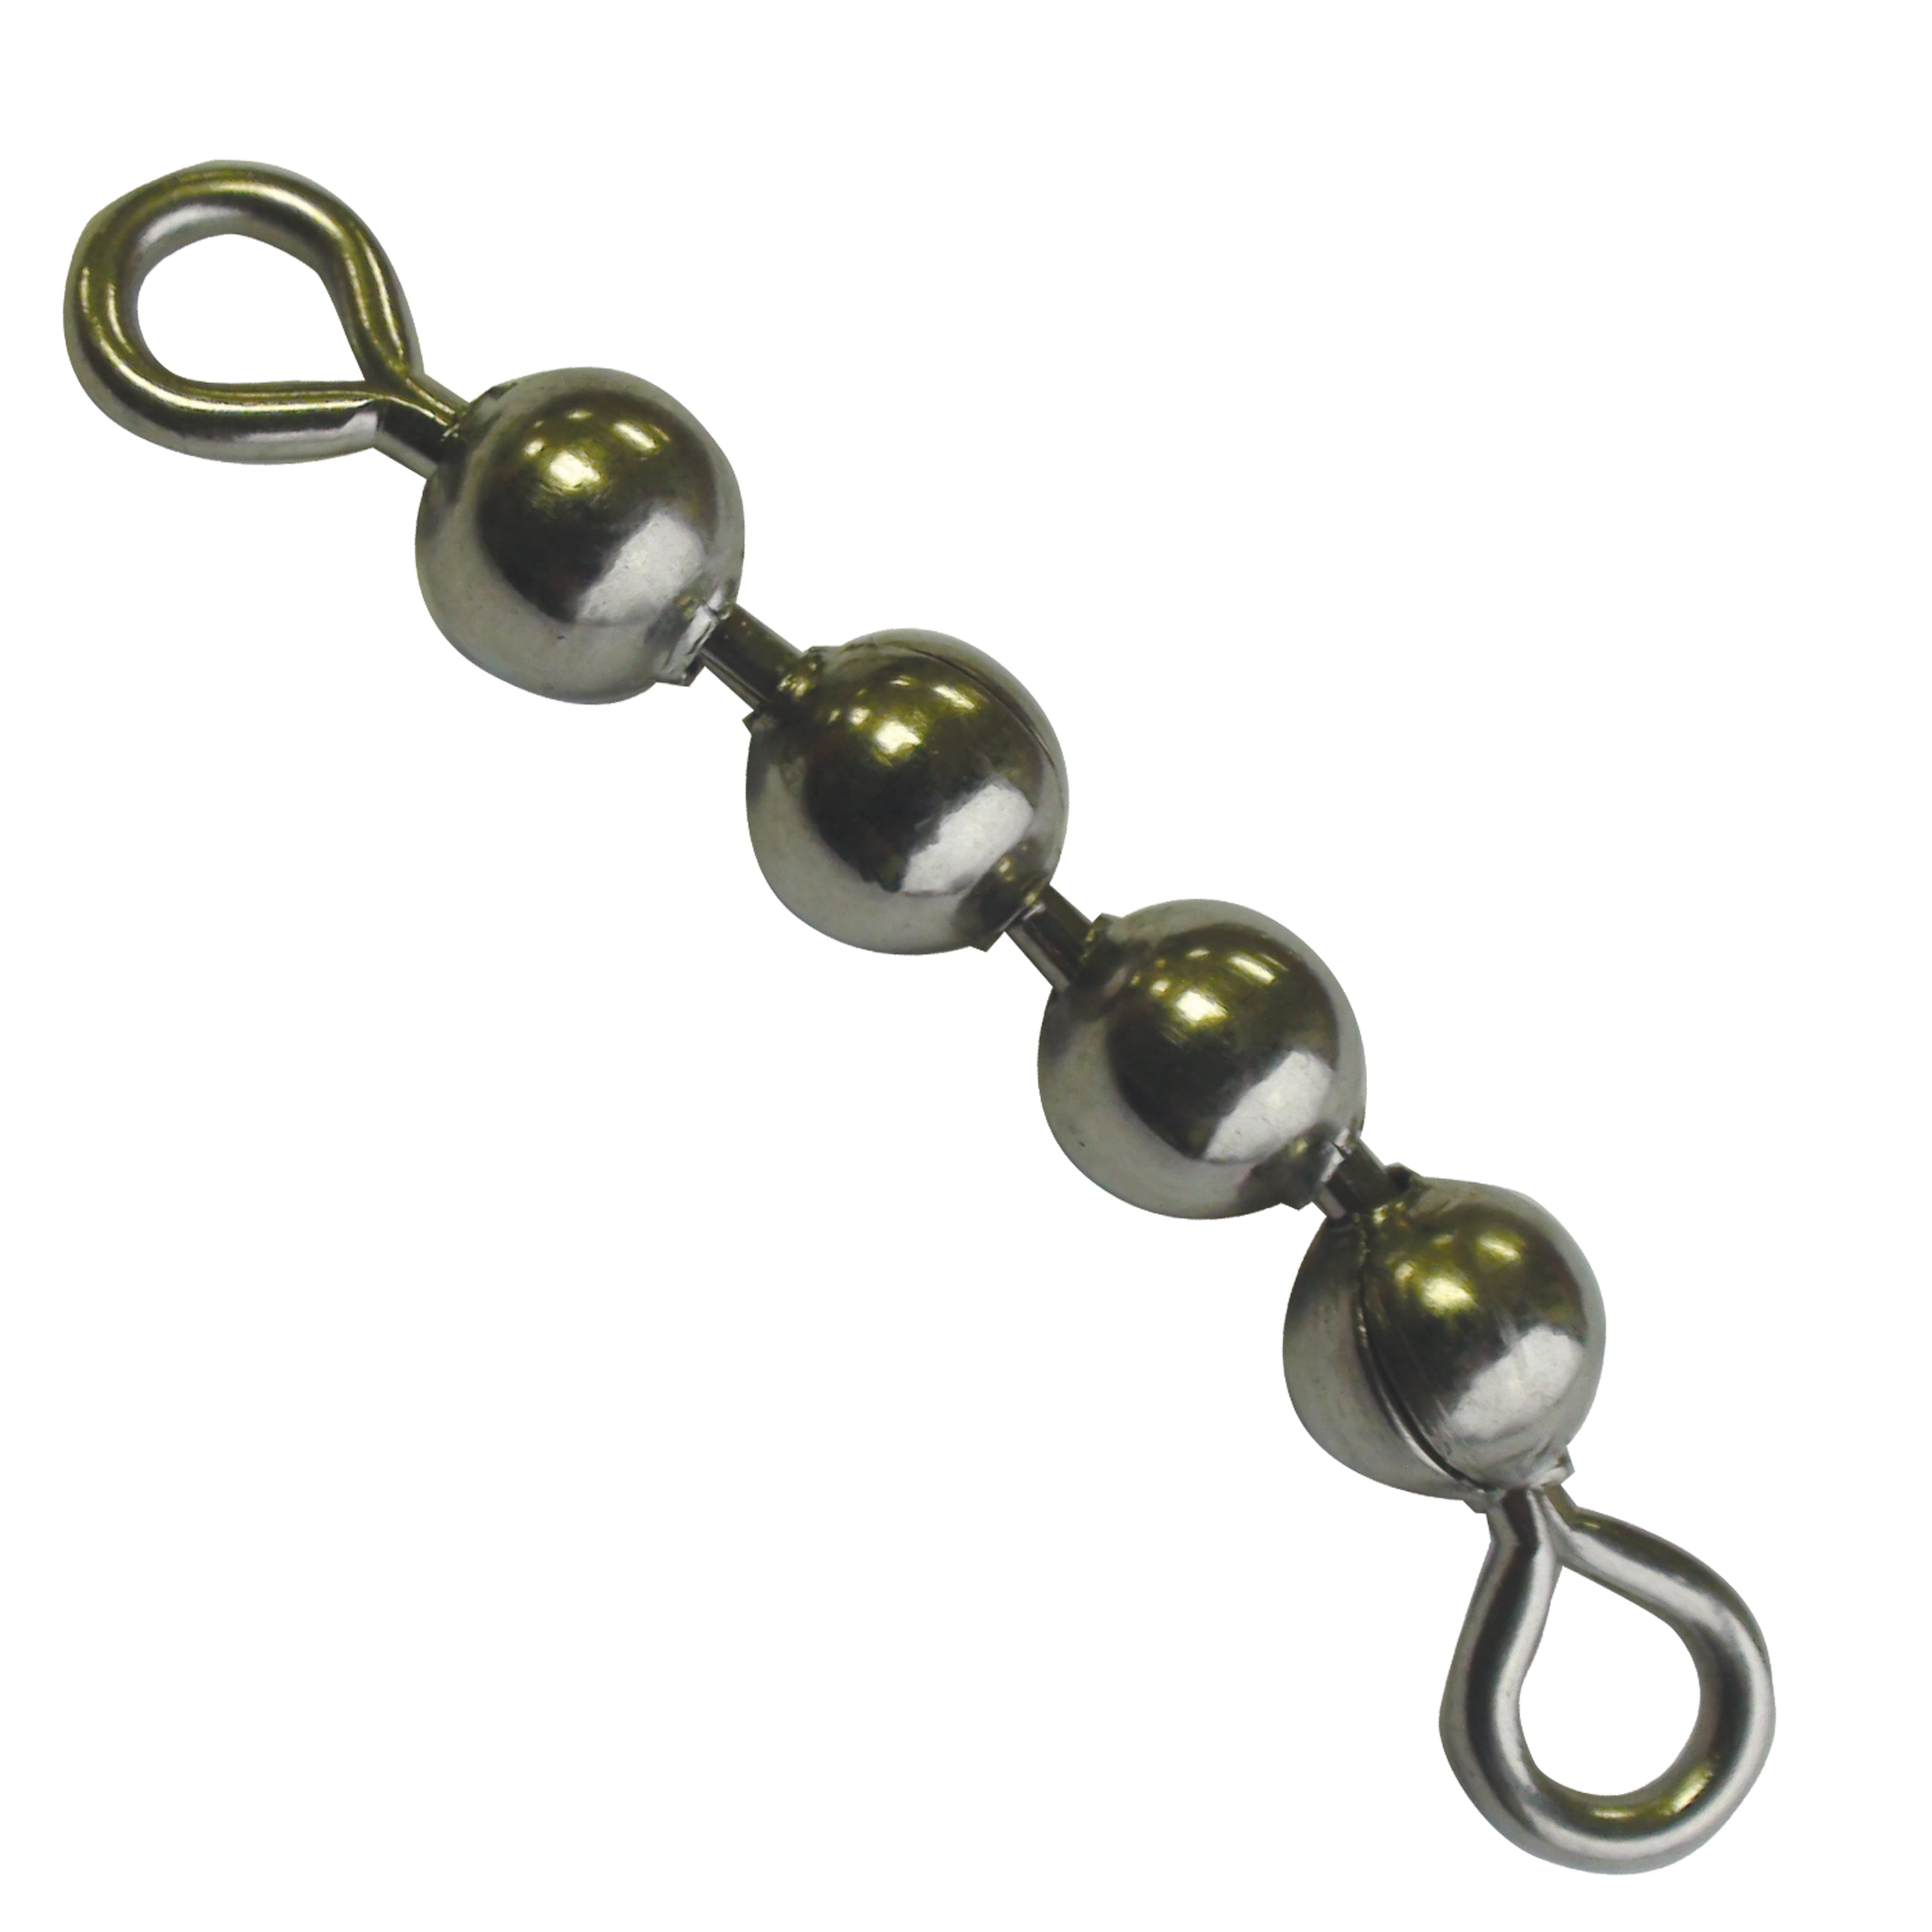 New US Made - 25 Stainless Steel 6 Bead Chain Fishing Swivels 100lb